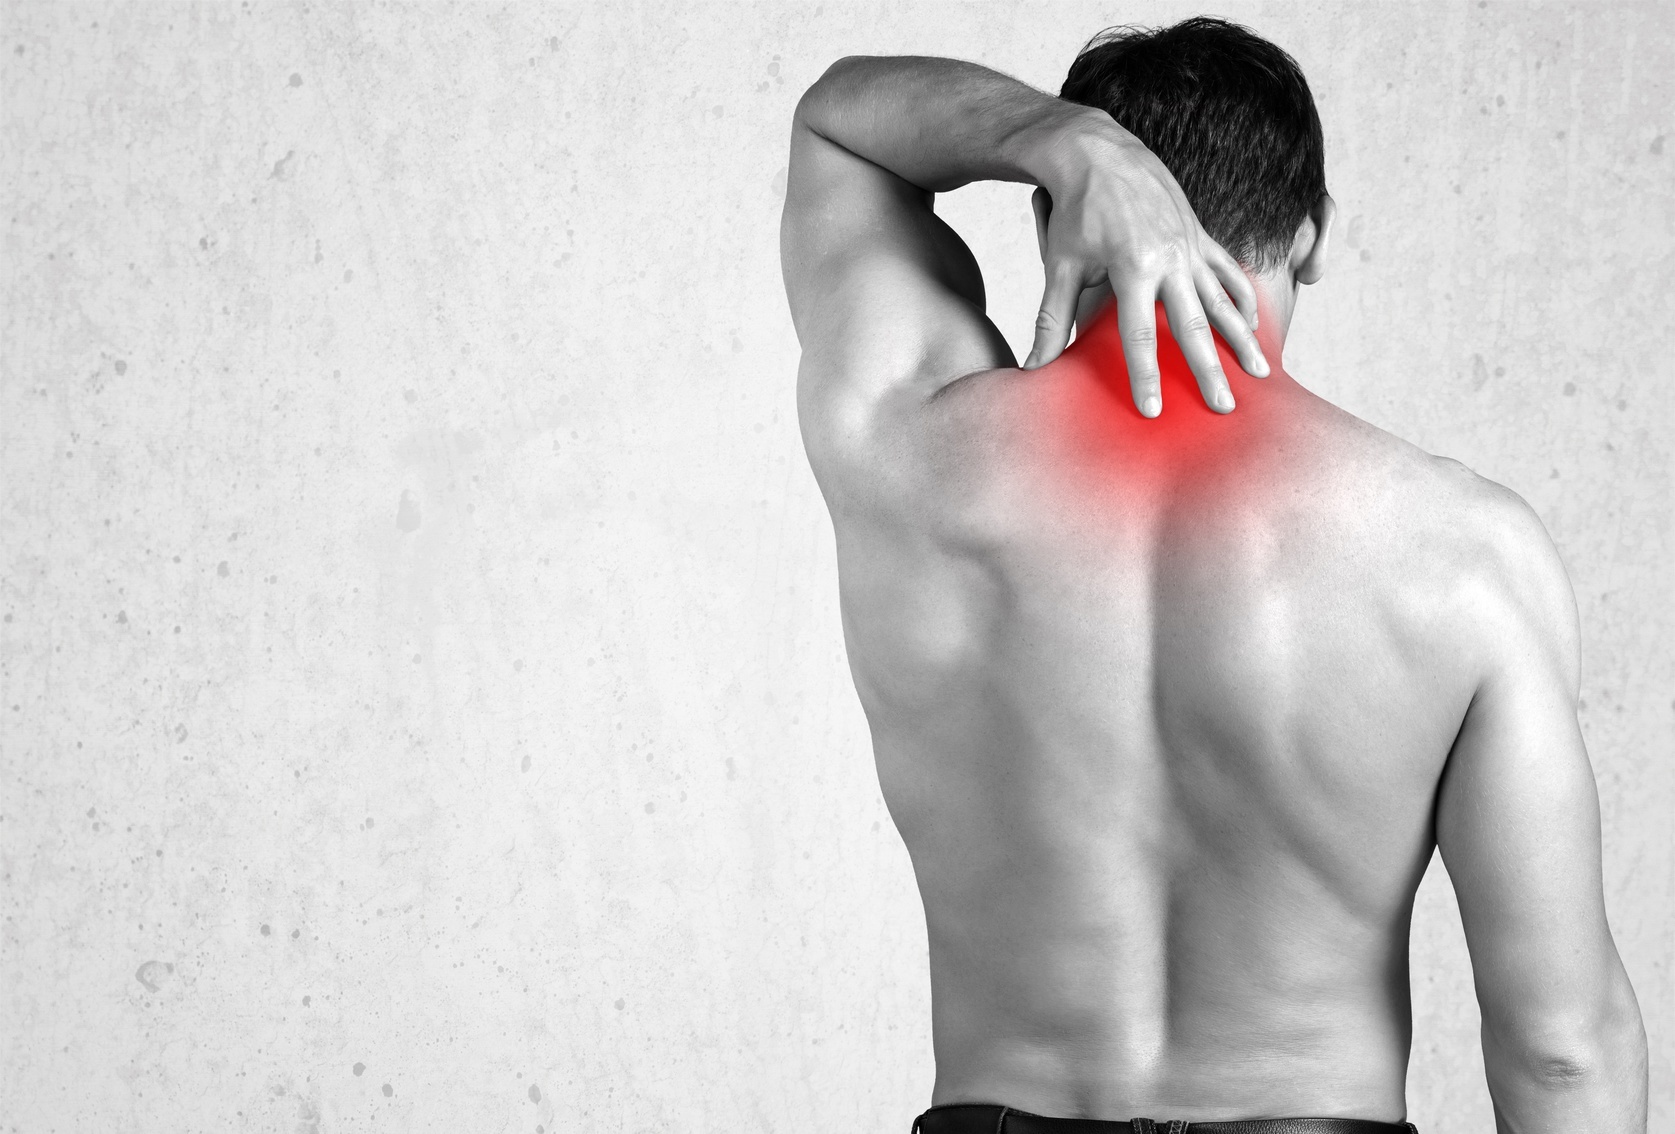 Neck Pain? Whiplash due to car or auto injury? Strained neck? Looking for a specialist that focus on neck treatment? 